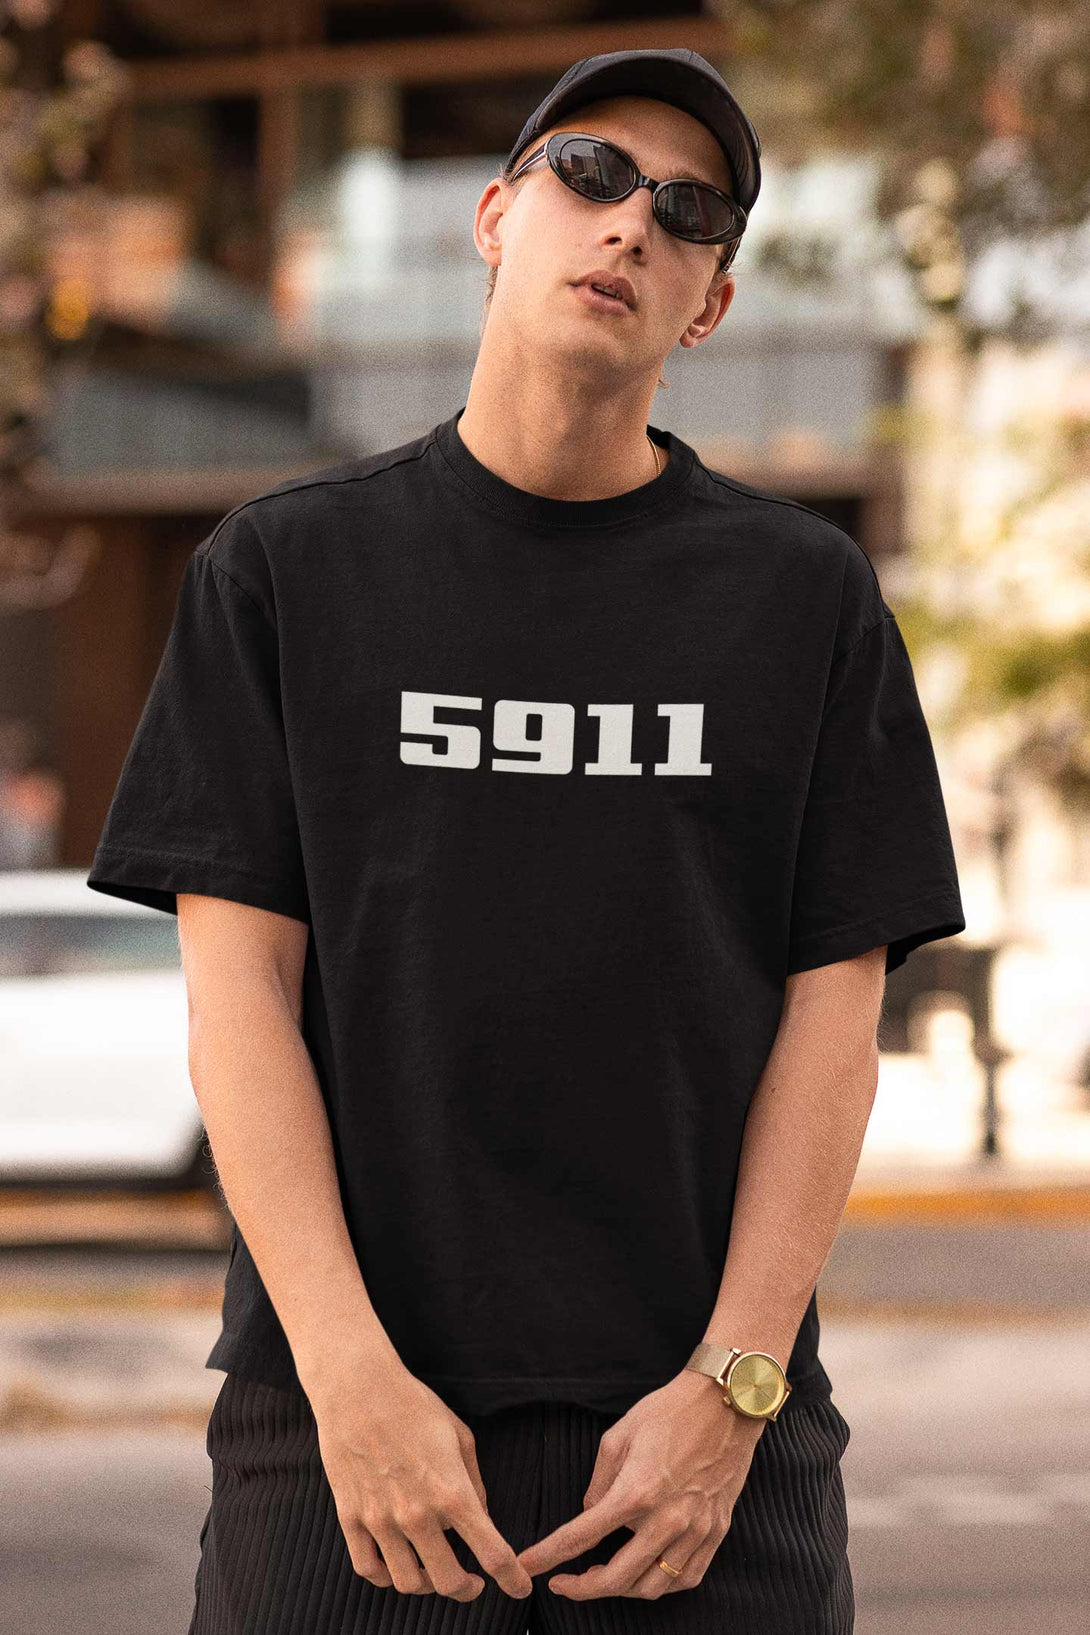 5911 printed on front of black oversized t-shirt